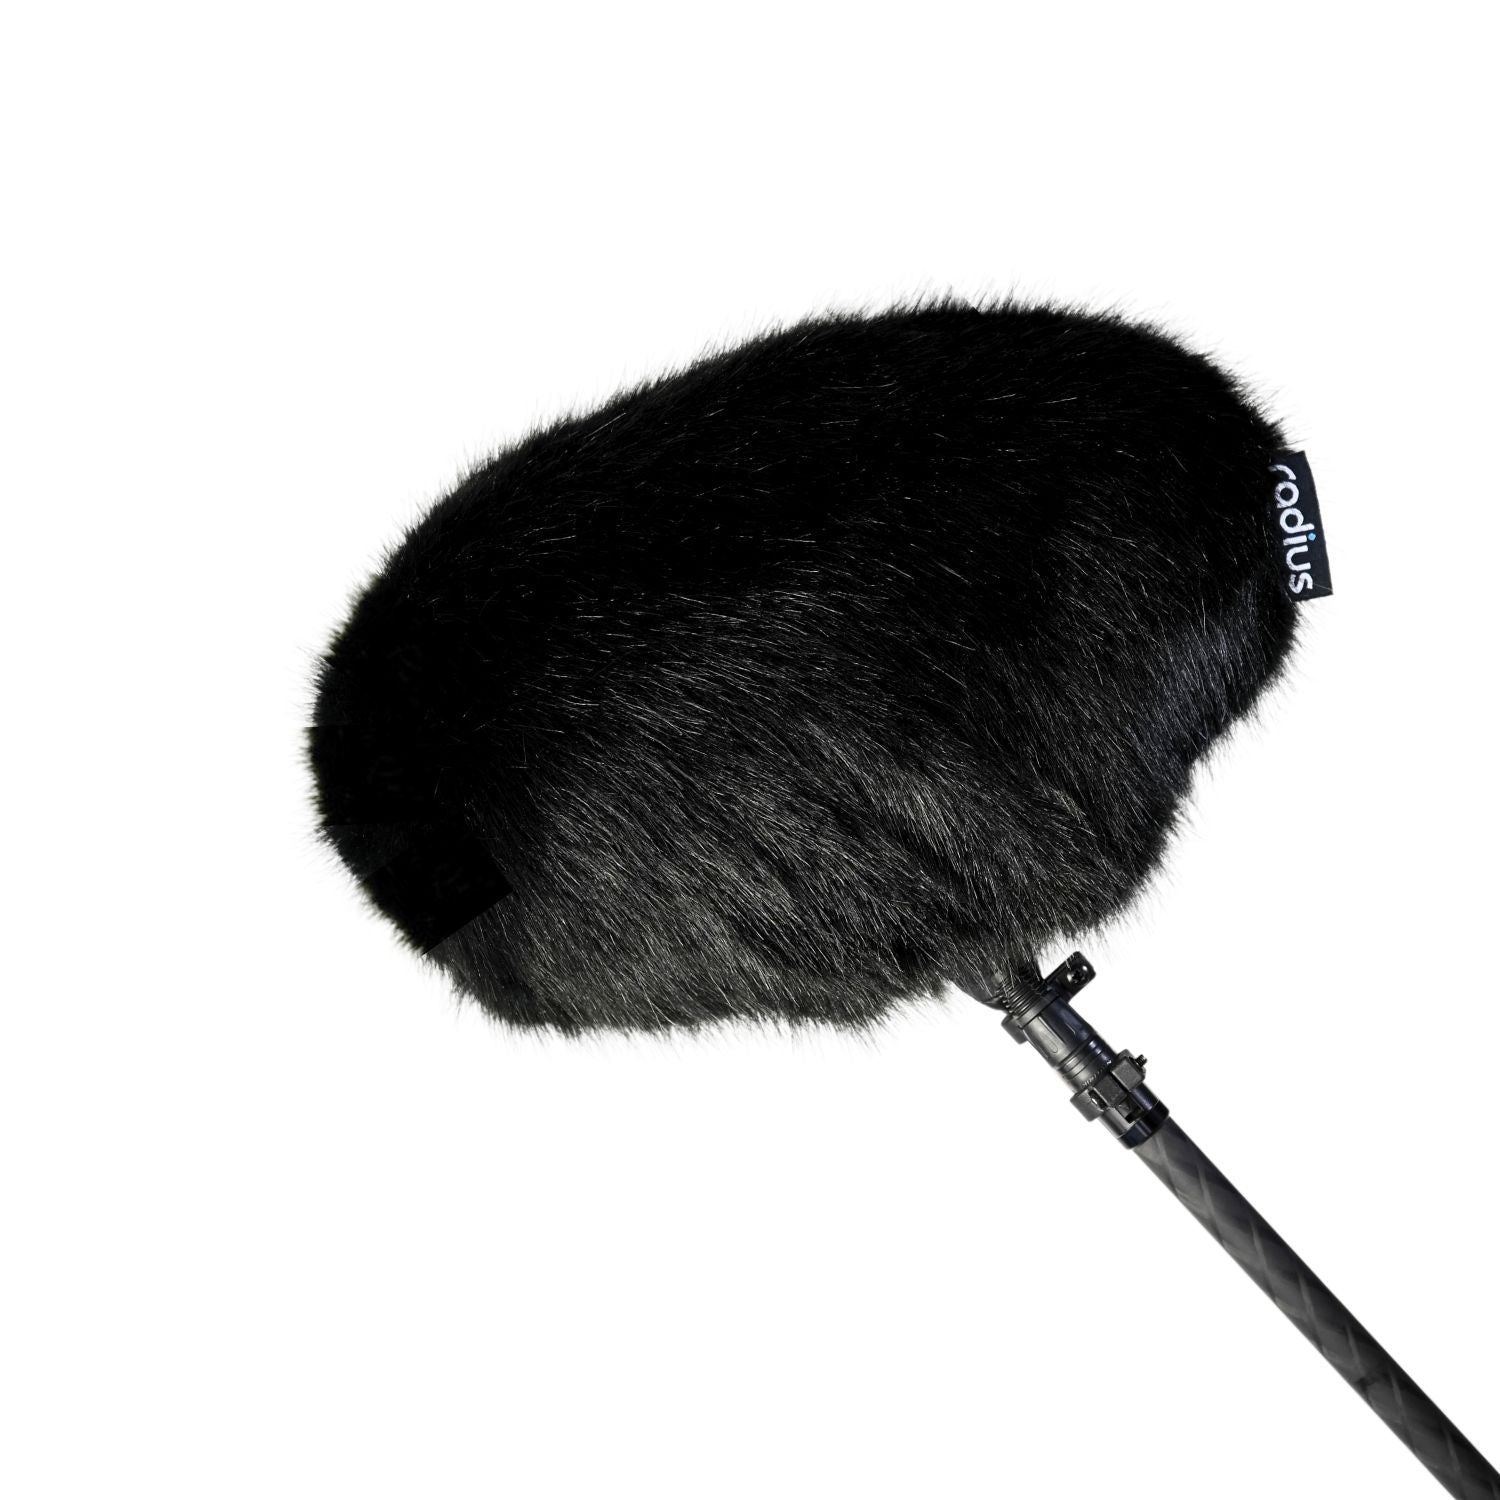 Replacement Windcover for Rycote Cyclone, Small, Black Fur